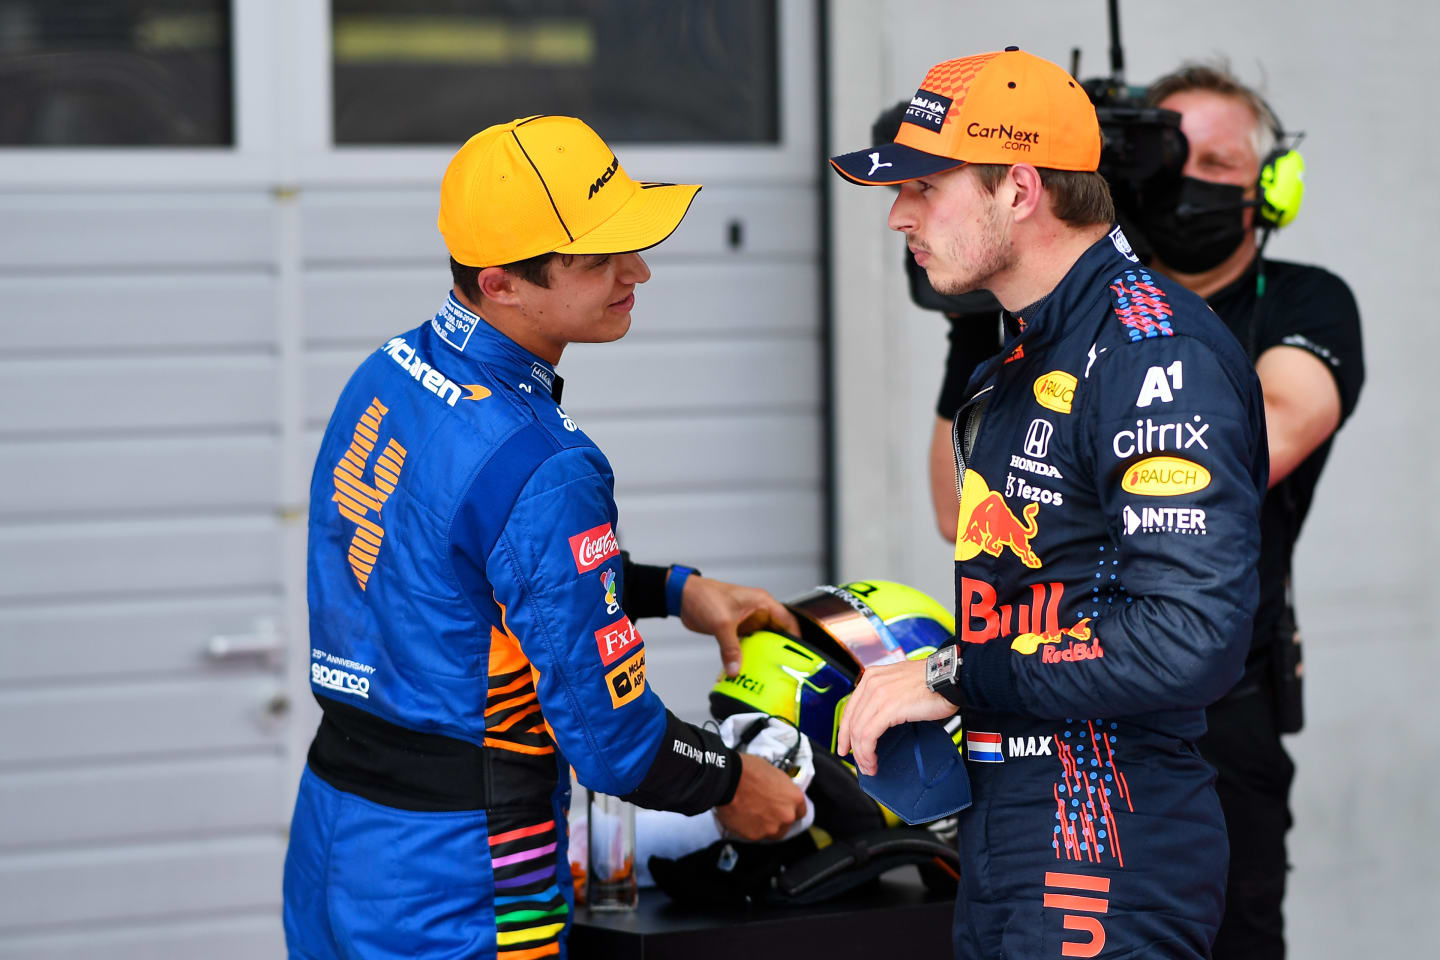 SPIELBERG, AUSTRIA - JULY 03: Pole position qualifier Max Verstappen of Netherlands and Red Bull Racing and second place qualifier Lando Norris of Great Britain and McLaren F1 talk in parc ferme during qualifying ahead of the F1 Grand Prix of Austria at Red Bull Ring on July 03, 2021 in Spielberg, Austria. (Photo by Christian Bruna - Pool/Getty Images)